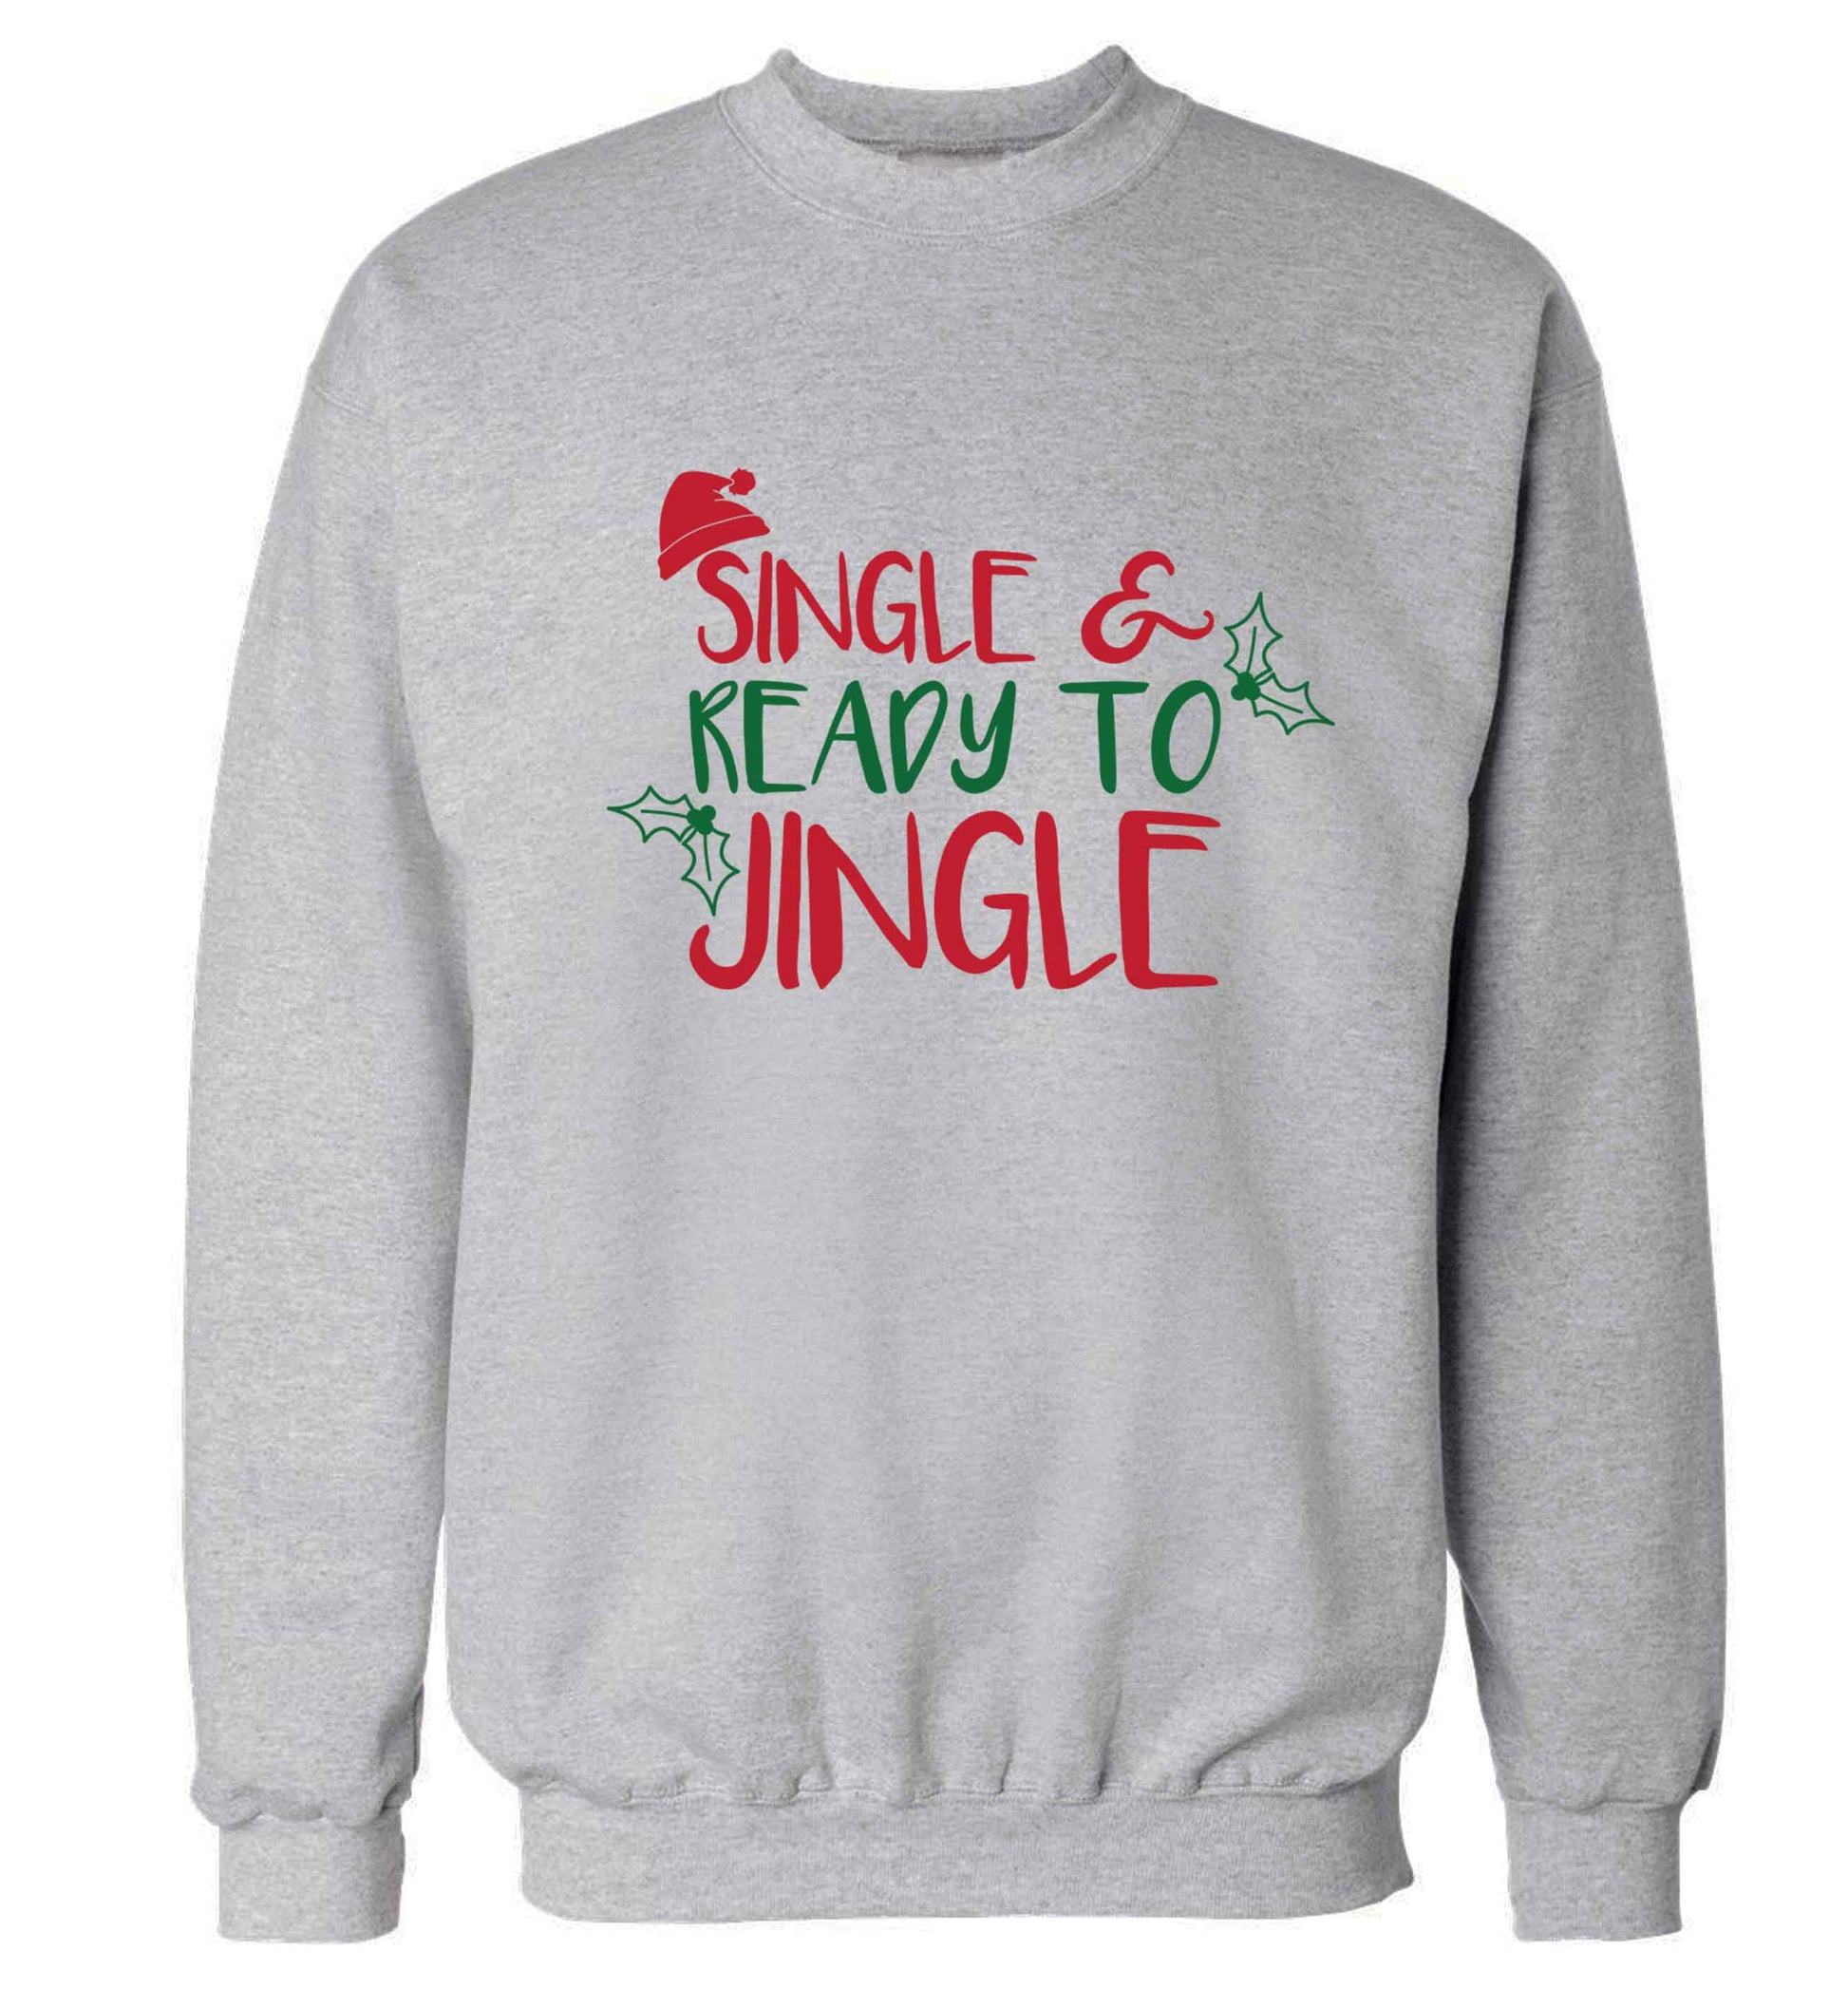 Single and ready to jingle Adult's unisex grey Sweater 2XL